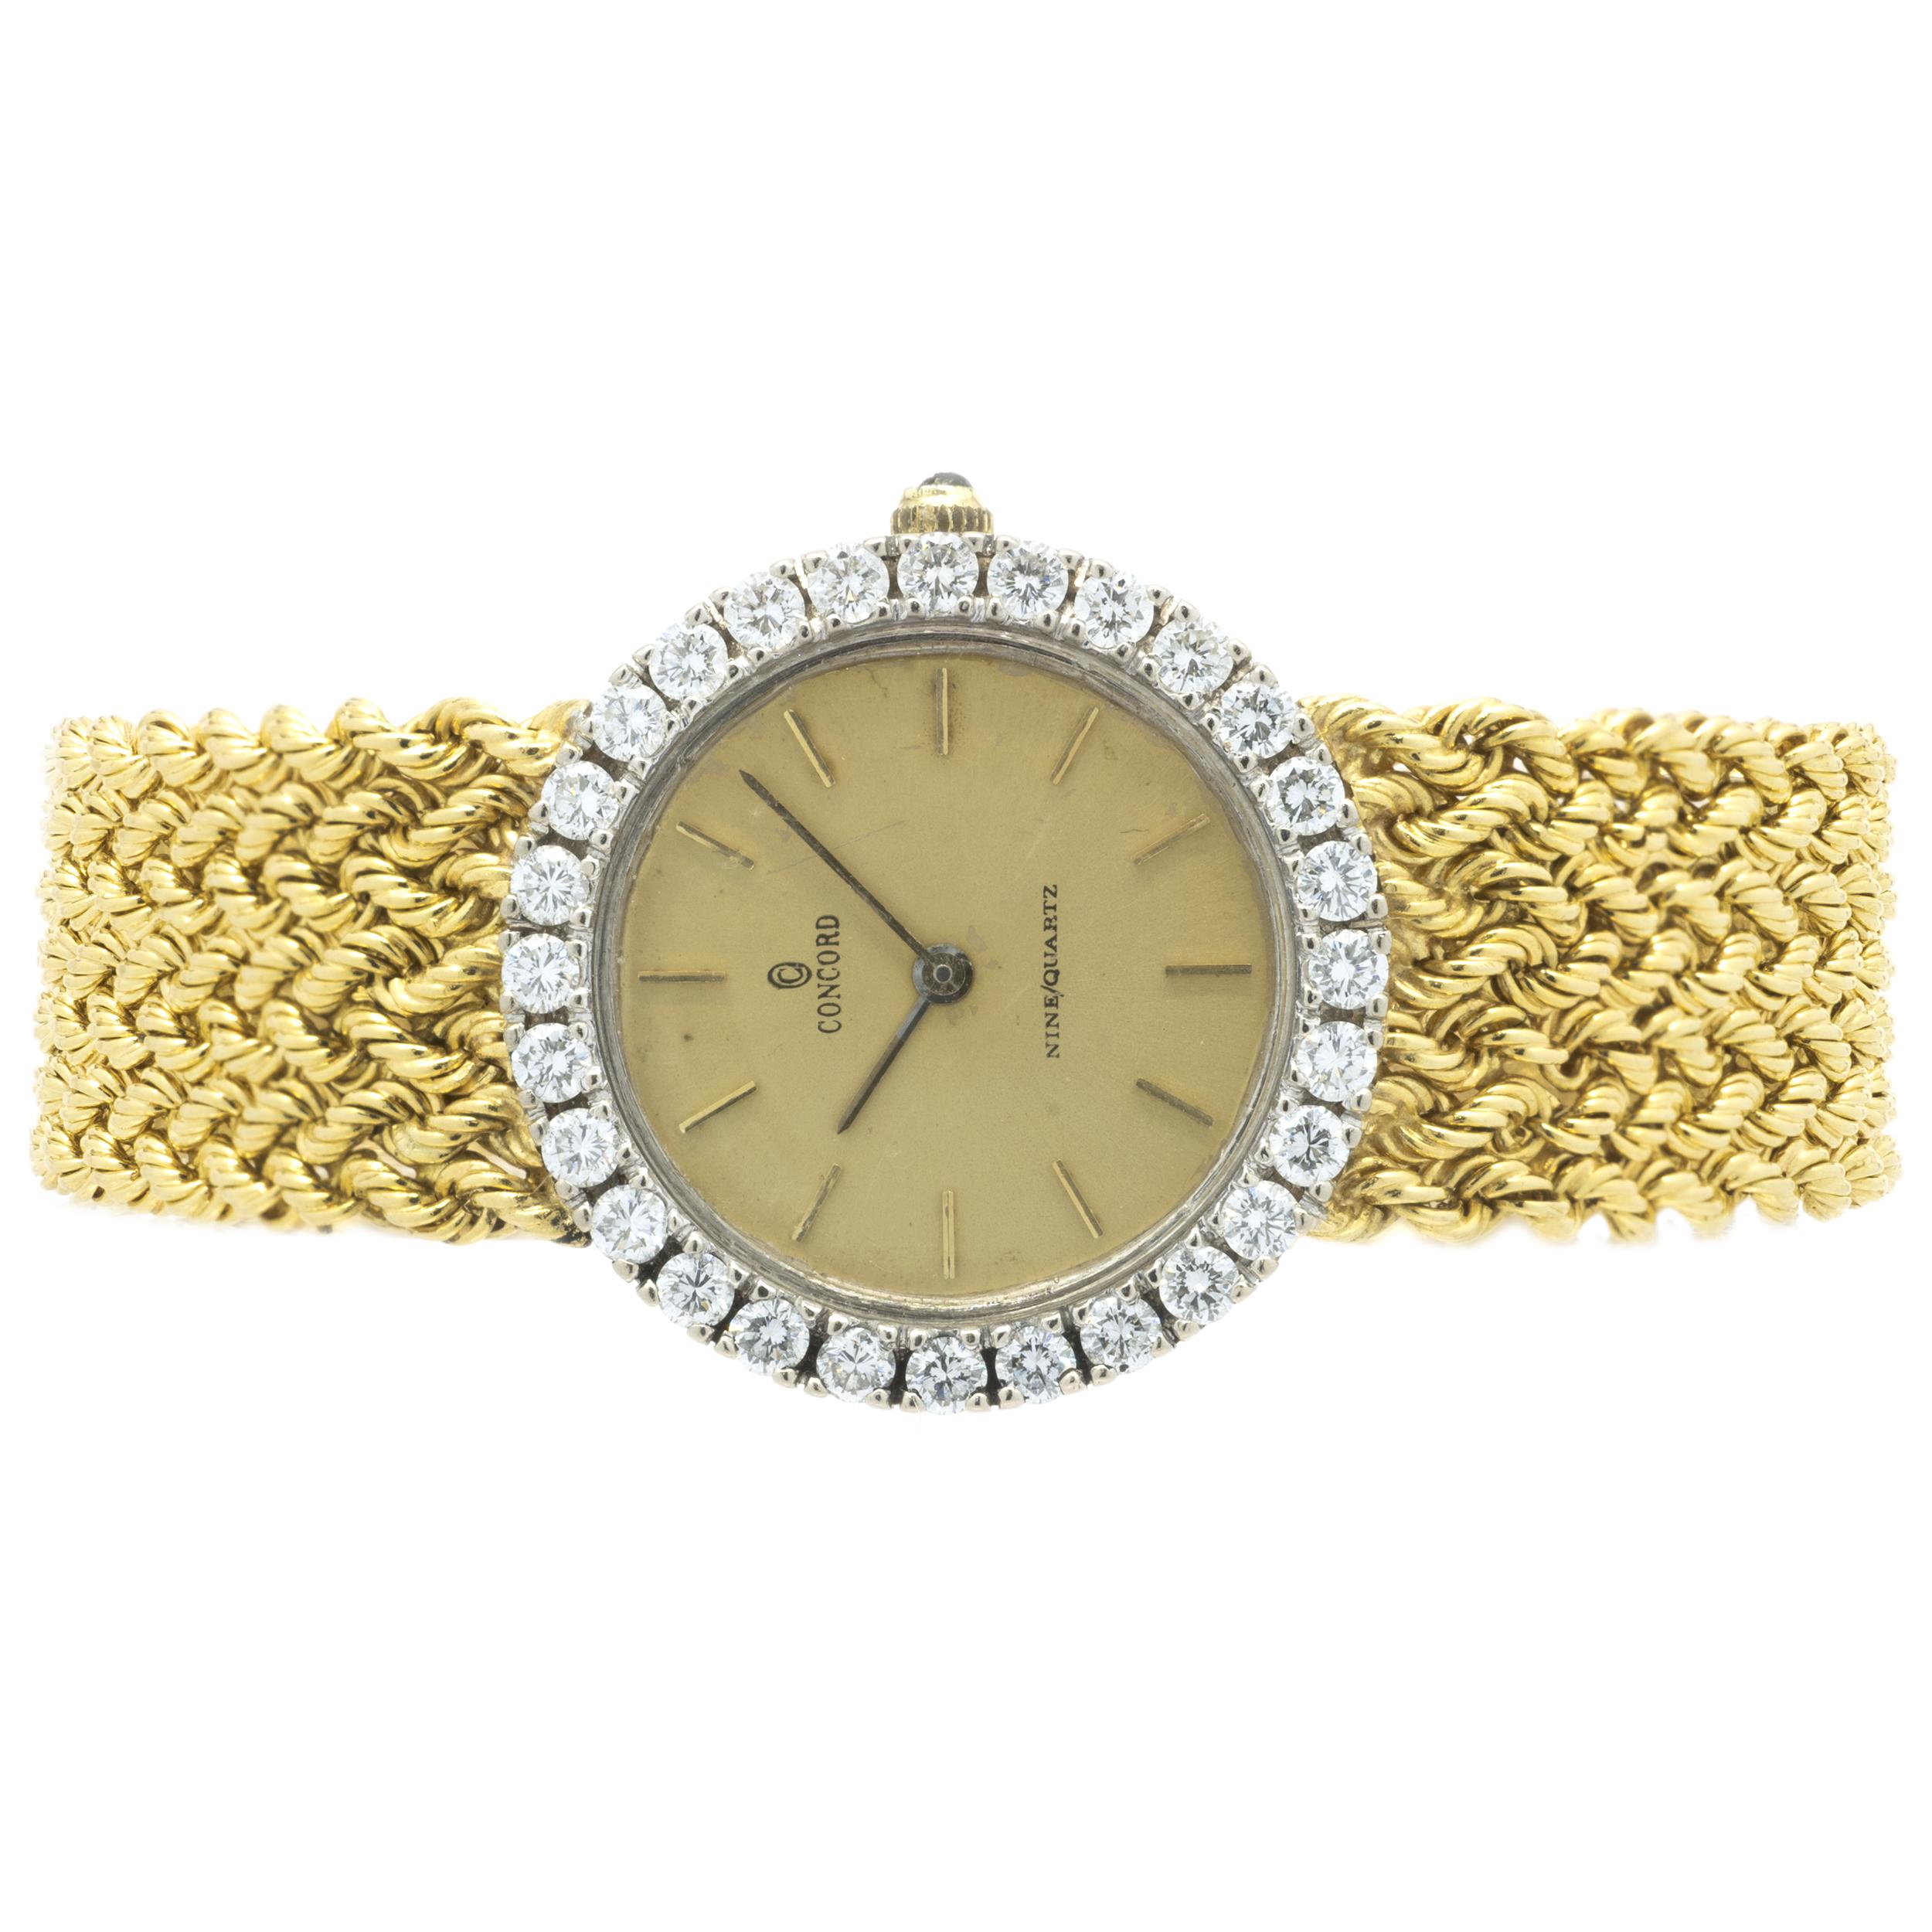 Movement: quartz
Function: hours, minutes
Case: 25mm 18K yellow gold round case, sapphire crystal, pull/push crown, water resistant, 0.84cttw round brilliant cut diamond bezel
Dial: champagne stick dial
Band: Concord 18KY mesh bracelet
Serial#: